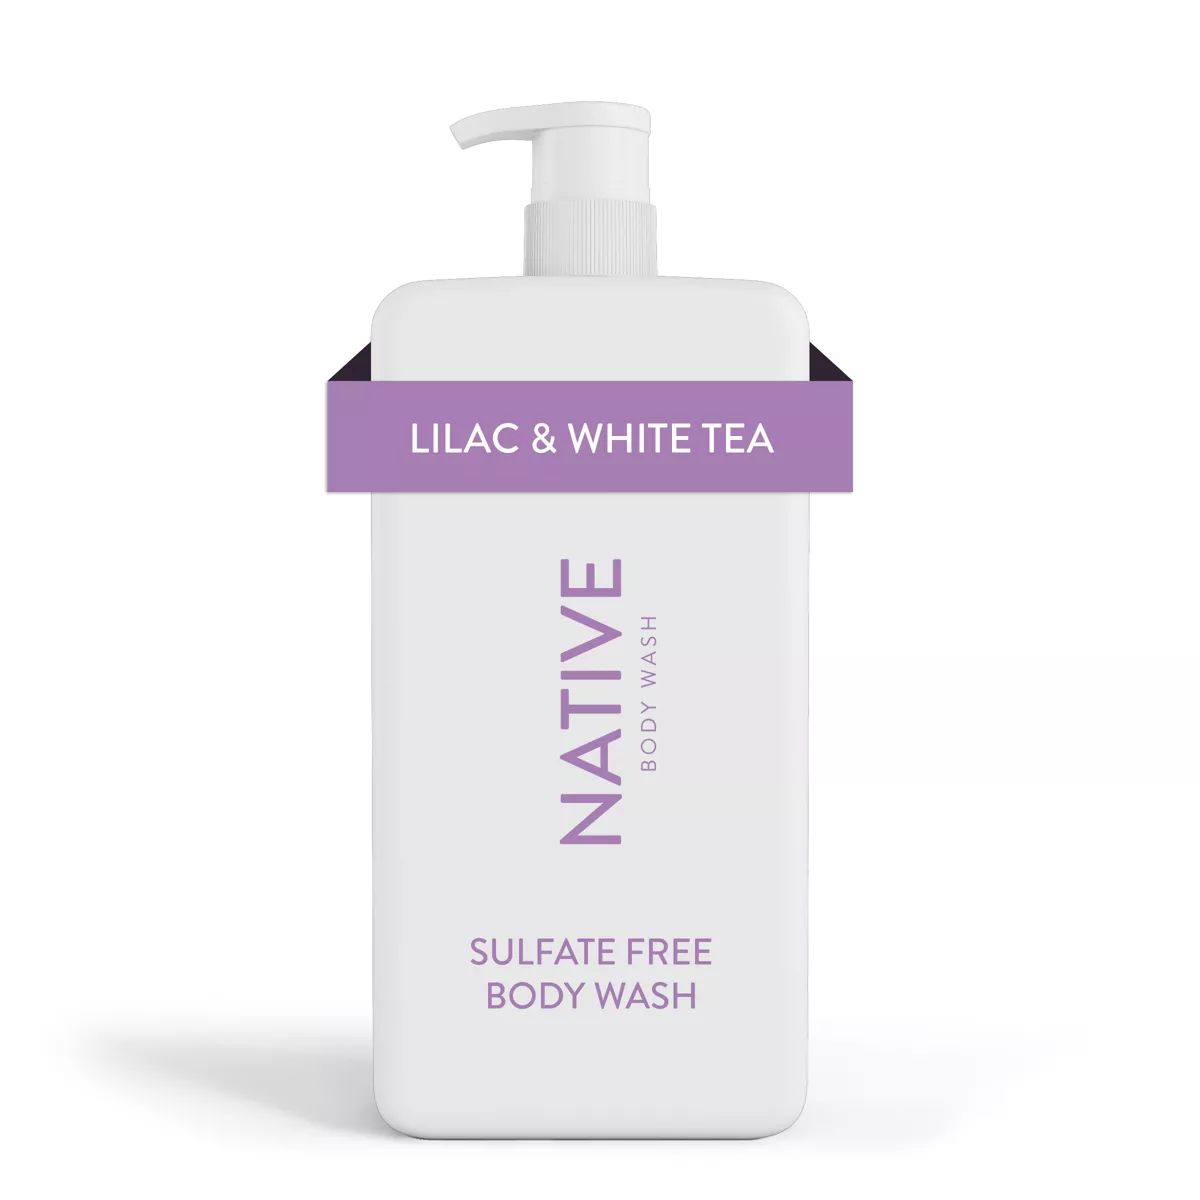 Native Body Wash with Pump - Lilac & White Tea - Sulfate Free - 36 fl oz | Target